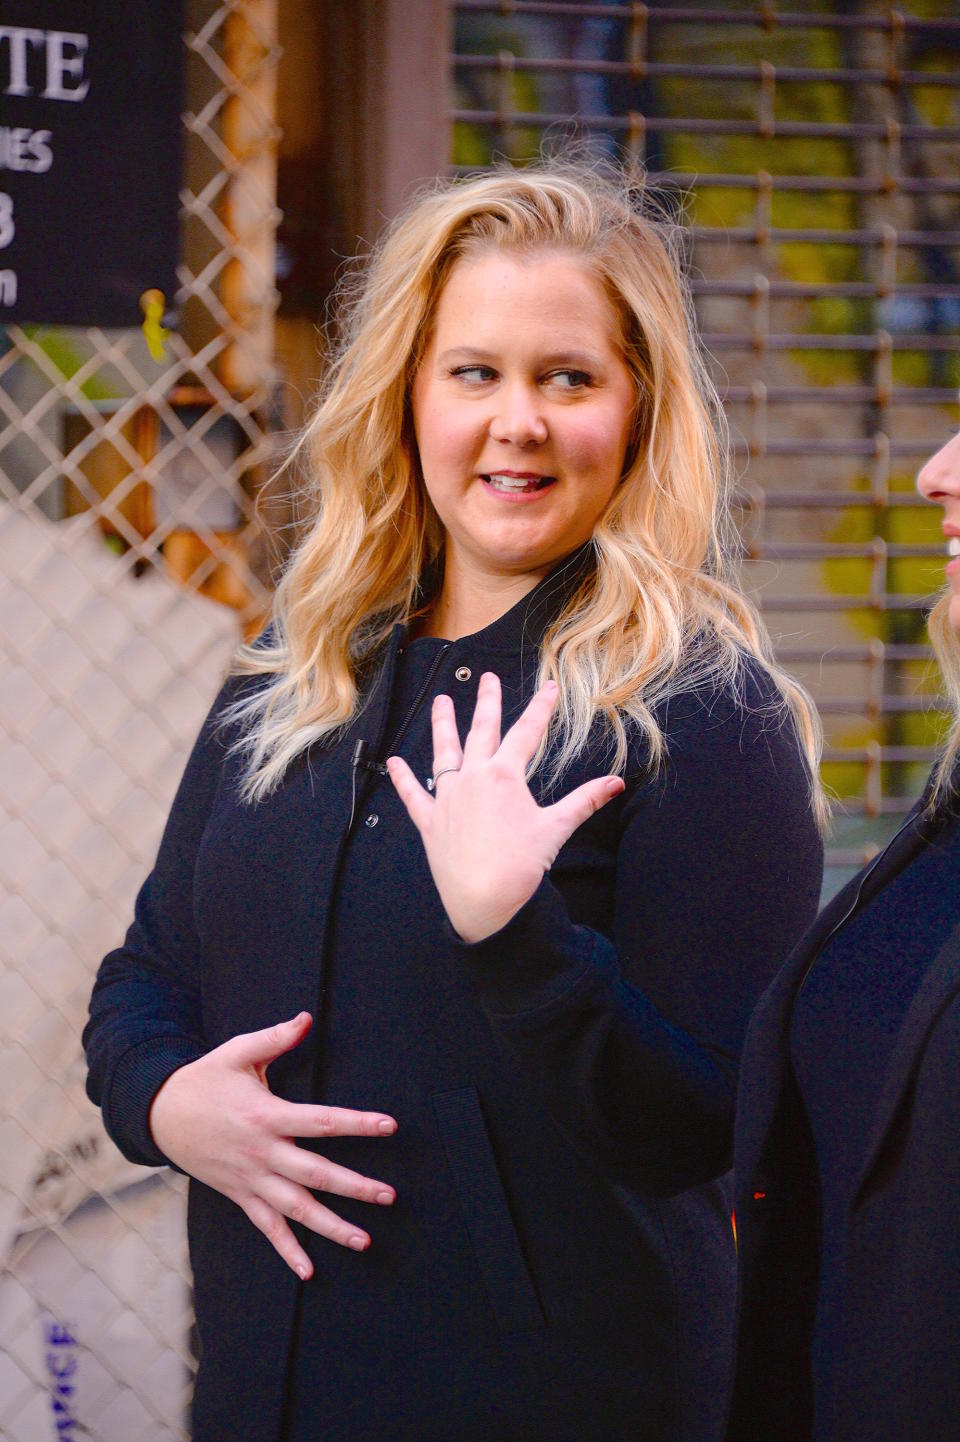 Amy Schumer seen while filming a commercial on Oct. 25, 2018, in SoHo in New York City. (Photo: Robert Kamau/GC Images)